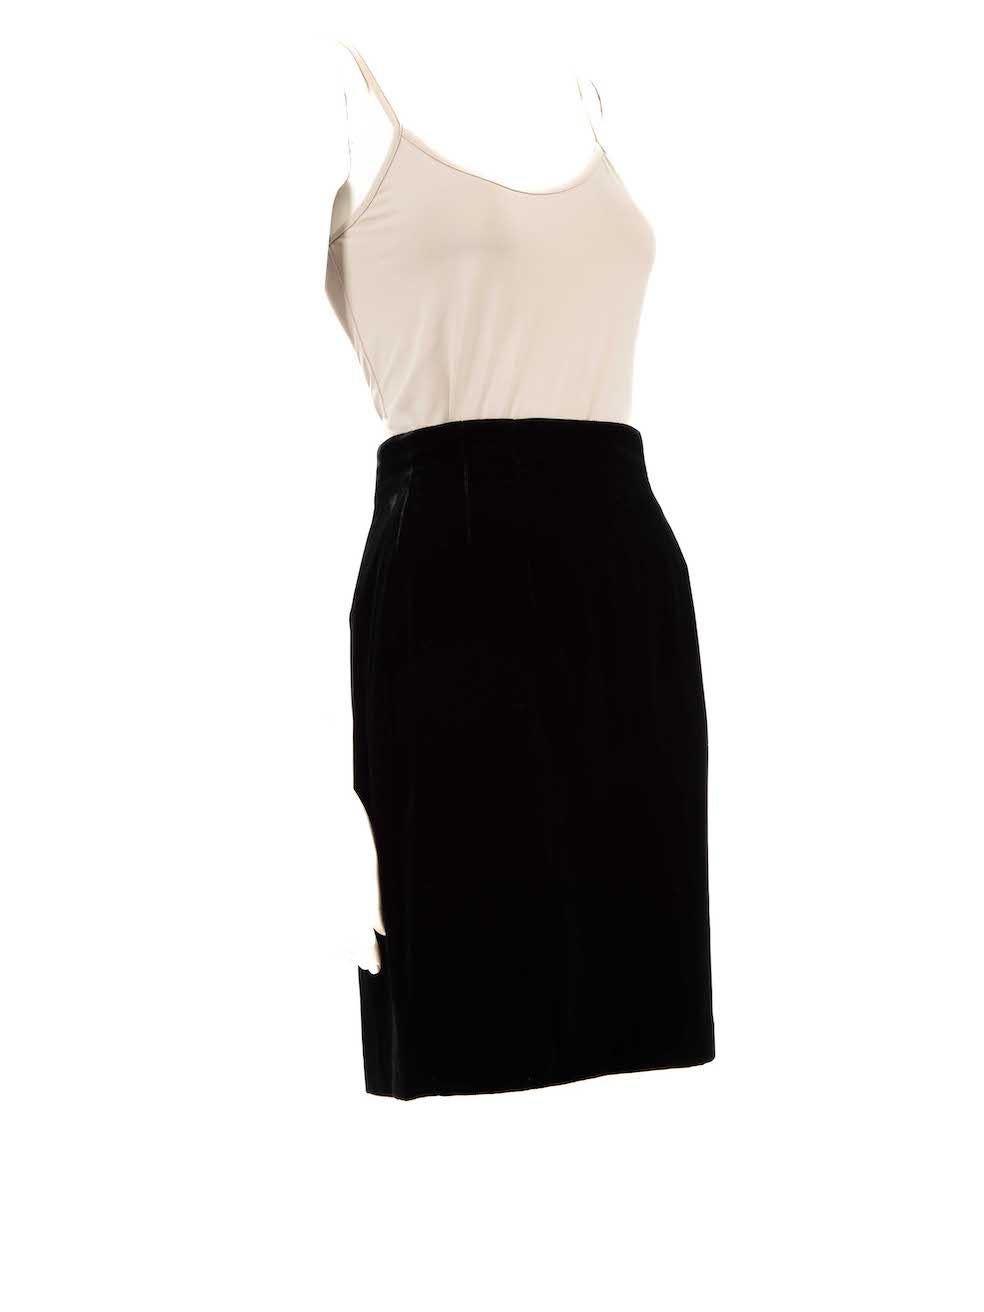 CONDITION is Very good. Hardly any visible wear to skirt is evident on this used Emanuel Ungaro designer resale item.
 
 
 
 Details
 
 
 Black
 
 Velvet
 
 Straight skirt
 
 Knee length
 
 Back zip closure with hook and eye
 
 
 
 
 
 Made in Hong